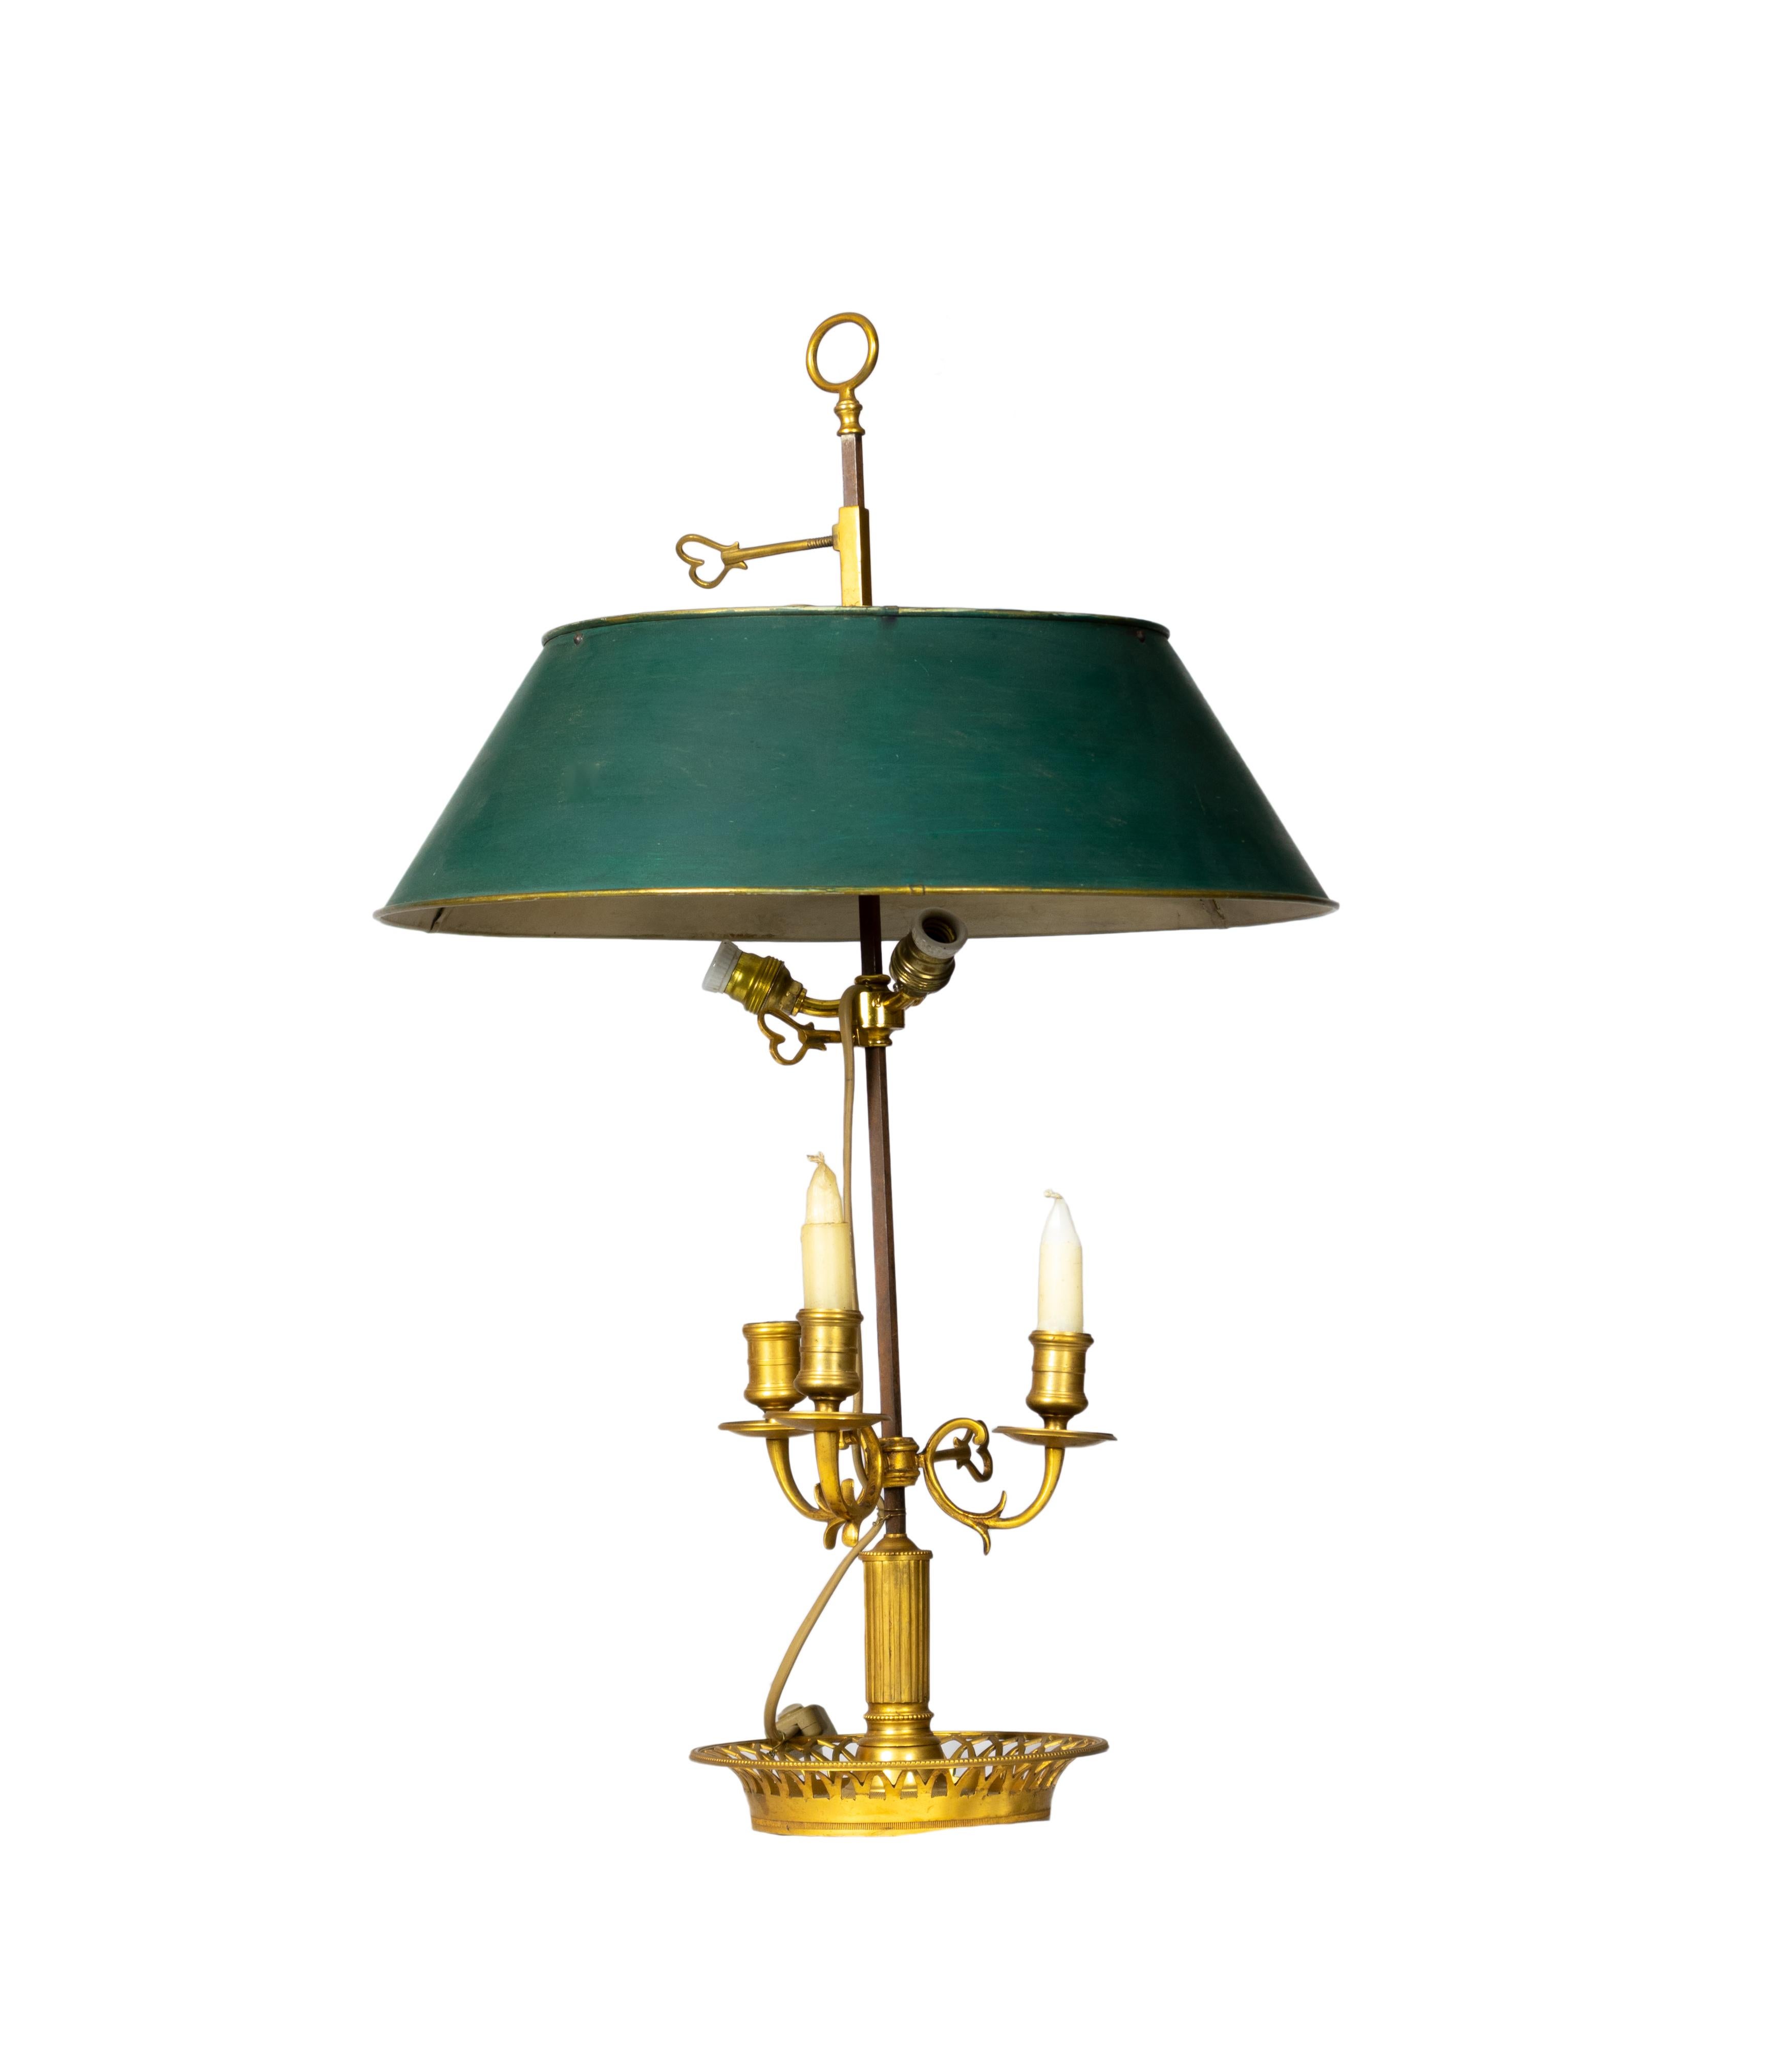 A French Empire-style period bouillotte lamp, boasting three bronze lights and an adjustable screen, is complemented by a verdant tole shade in hues of green.
